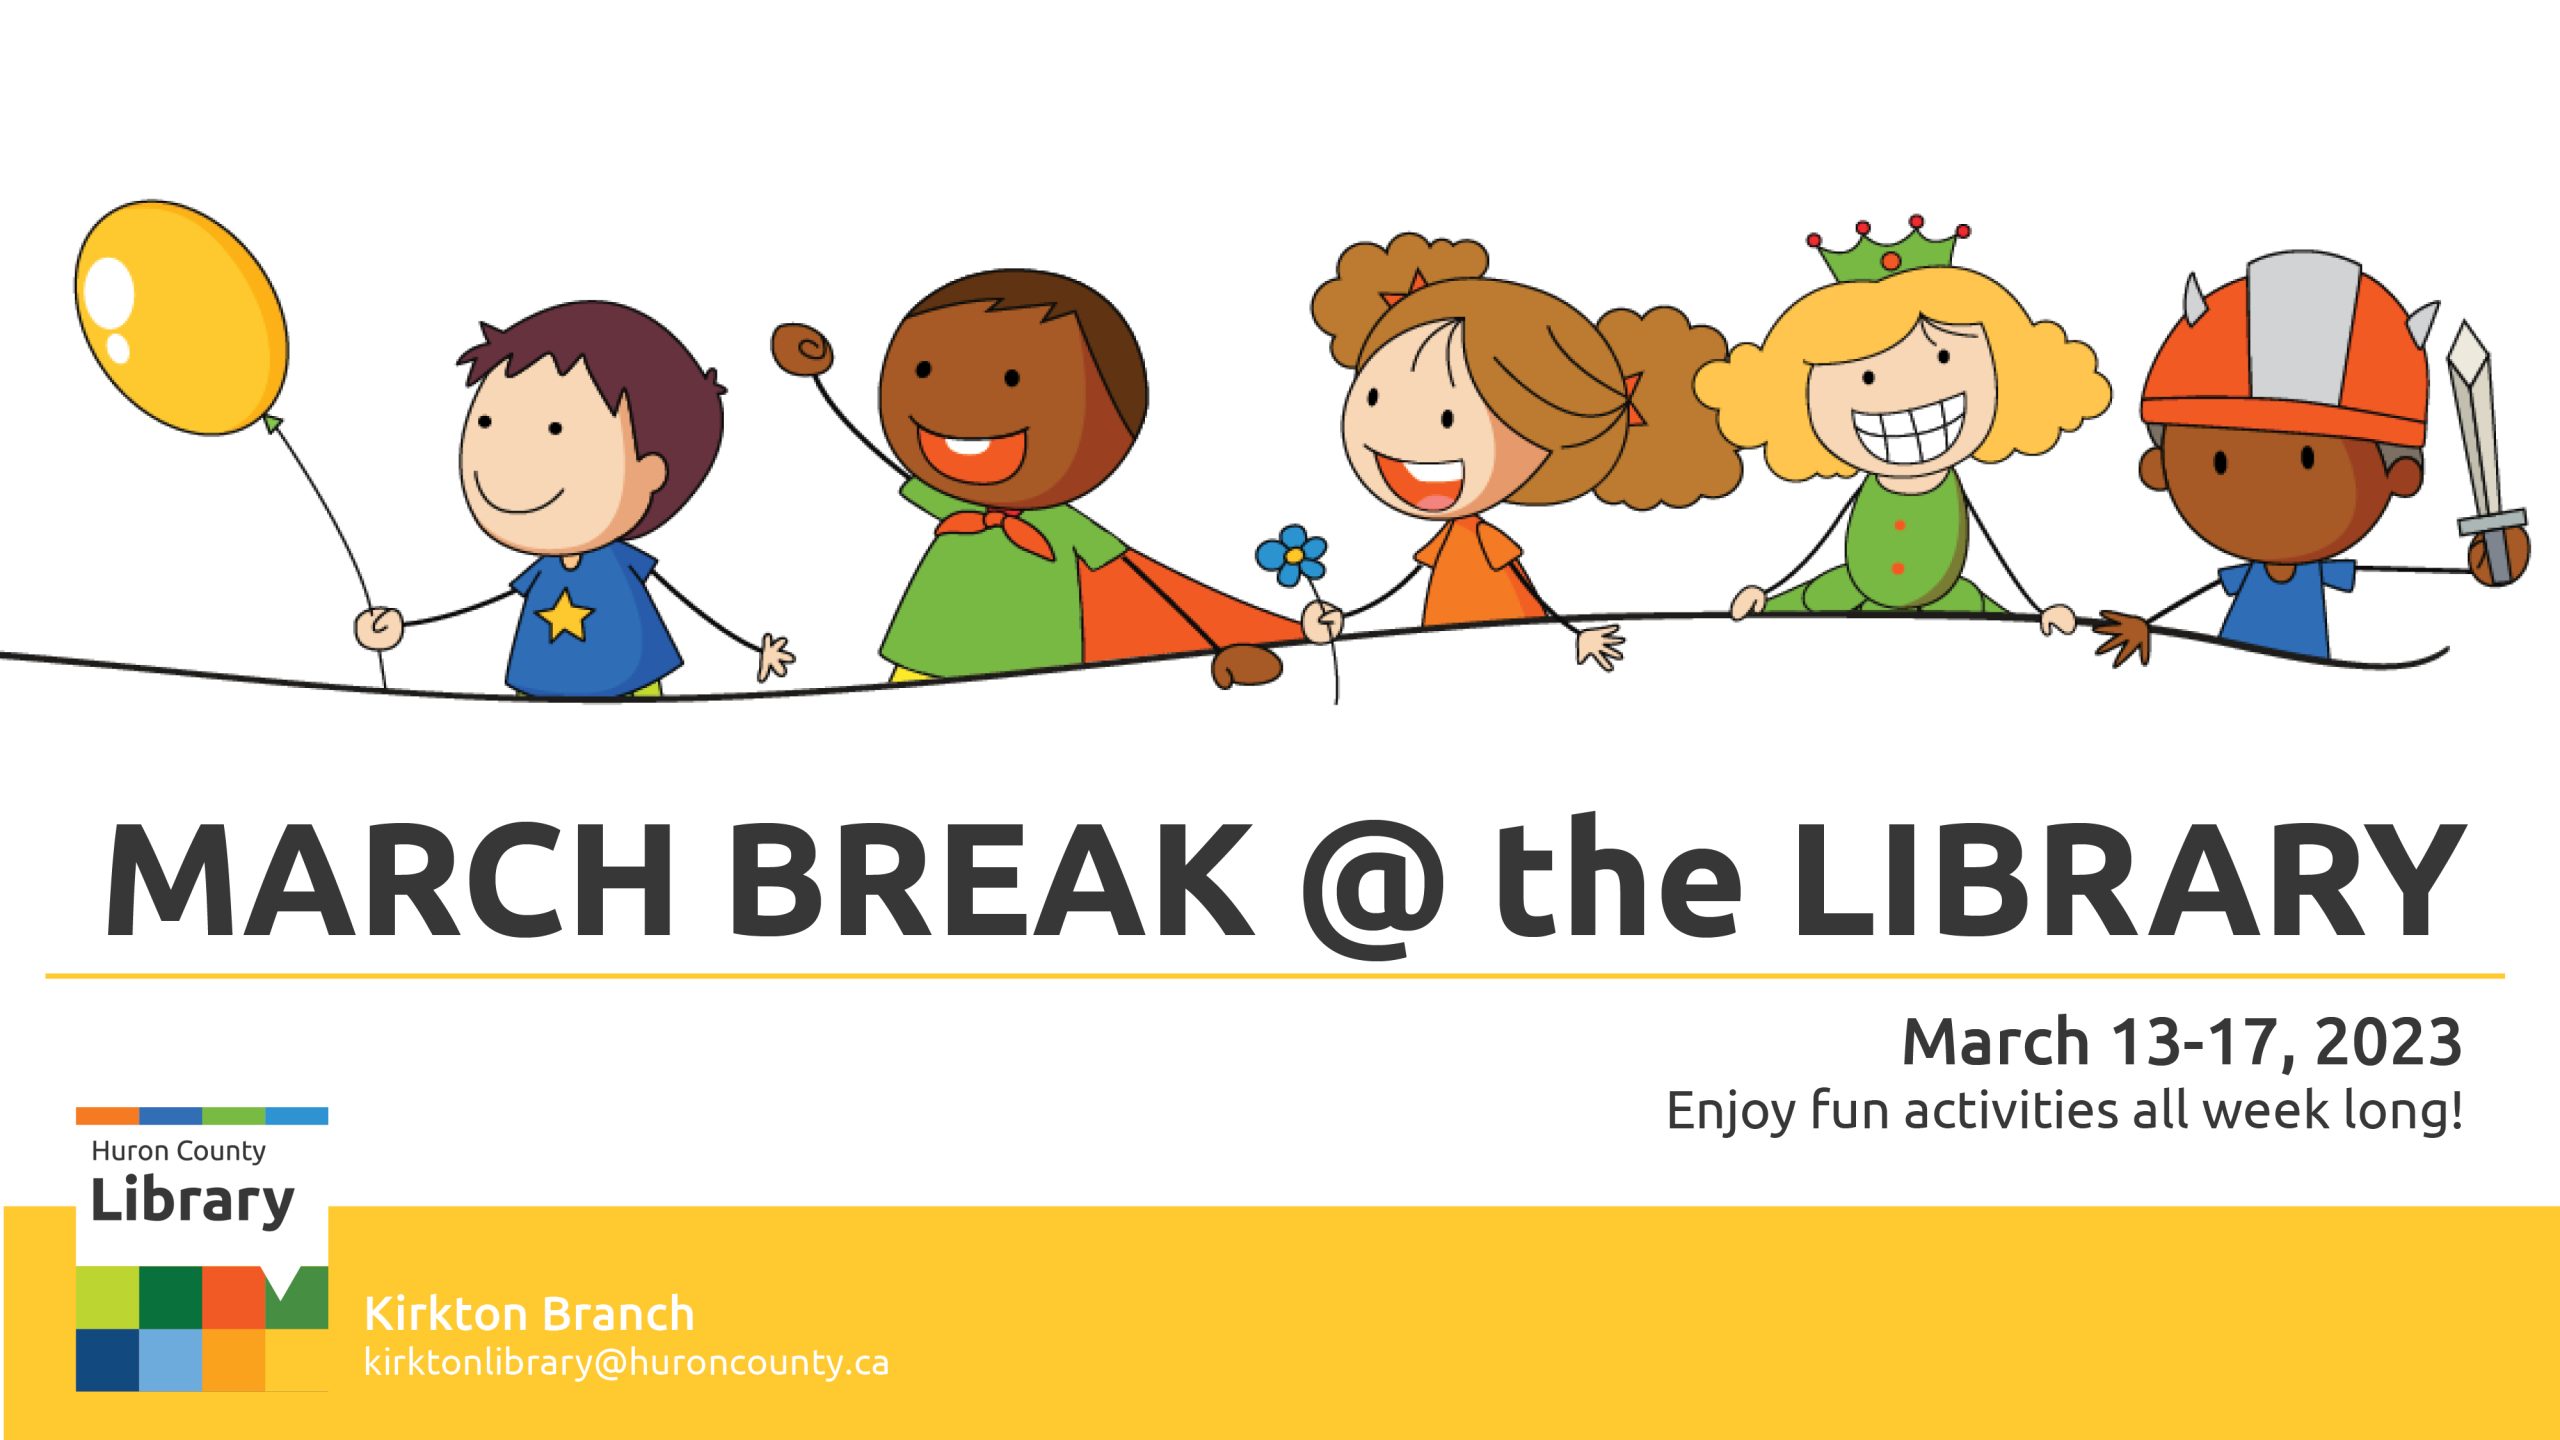 Illustration of 5 kids having fun with text promoting March Break at Kirkton Branch